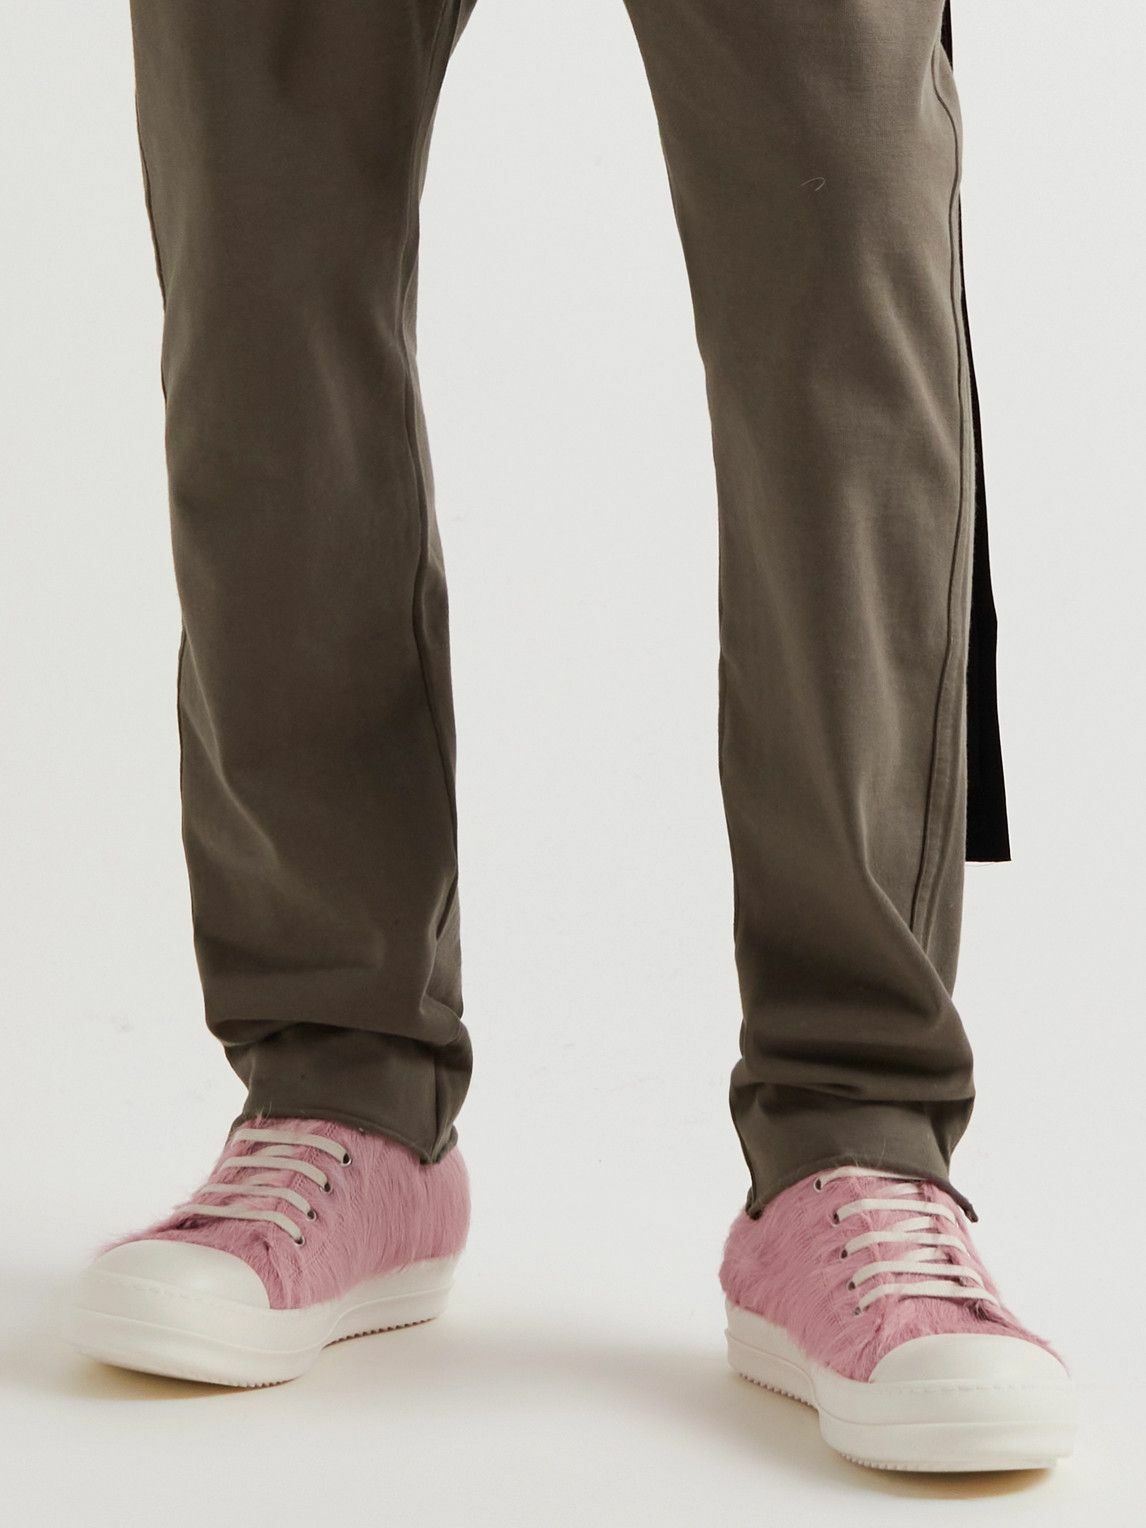 Rick Owens Leather Sneaker Boots in Pink